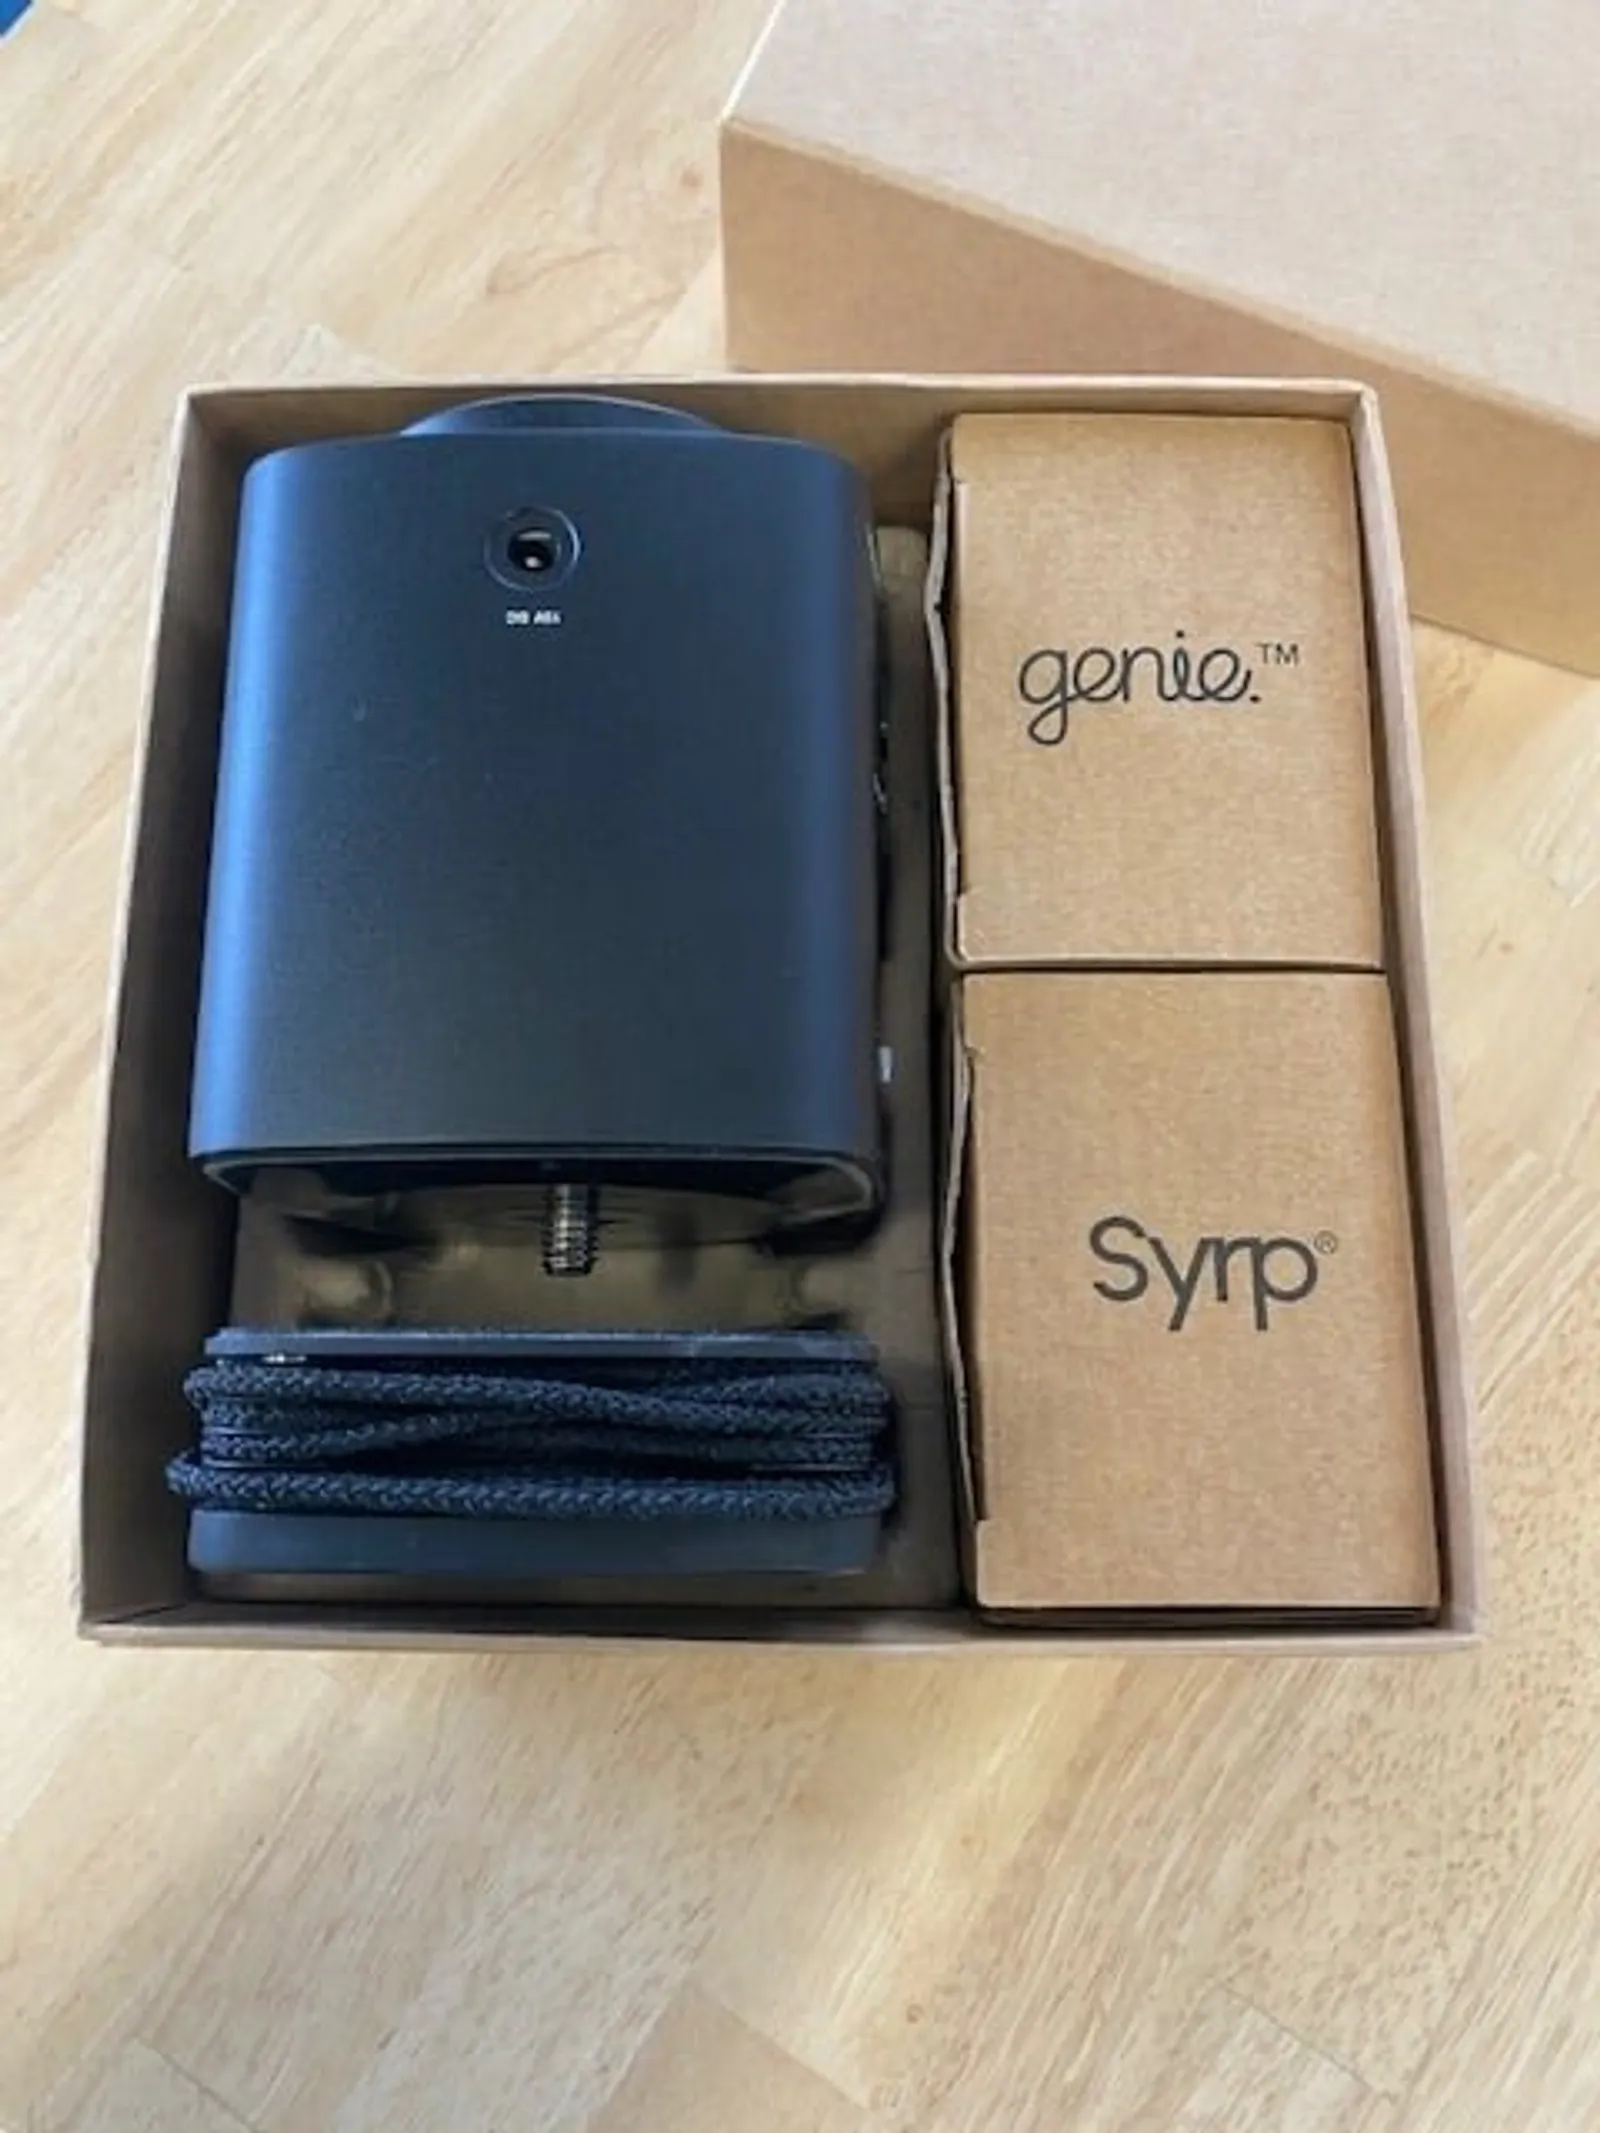 Syrp Genie Motion Control and Time-lapse Unit